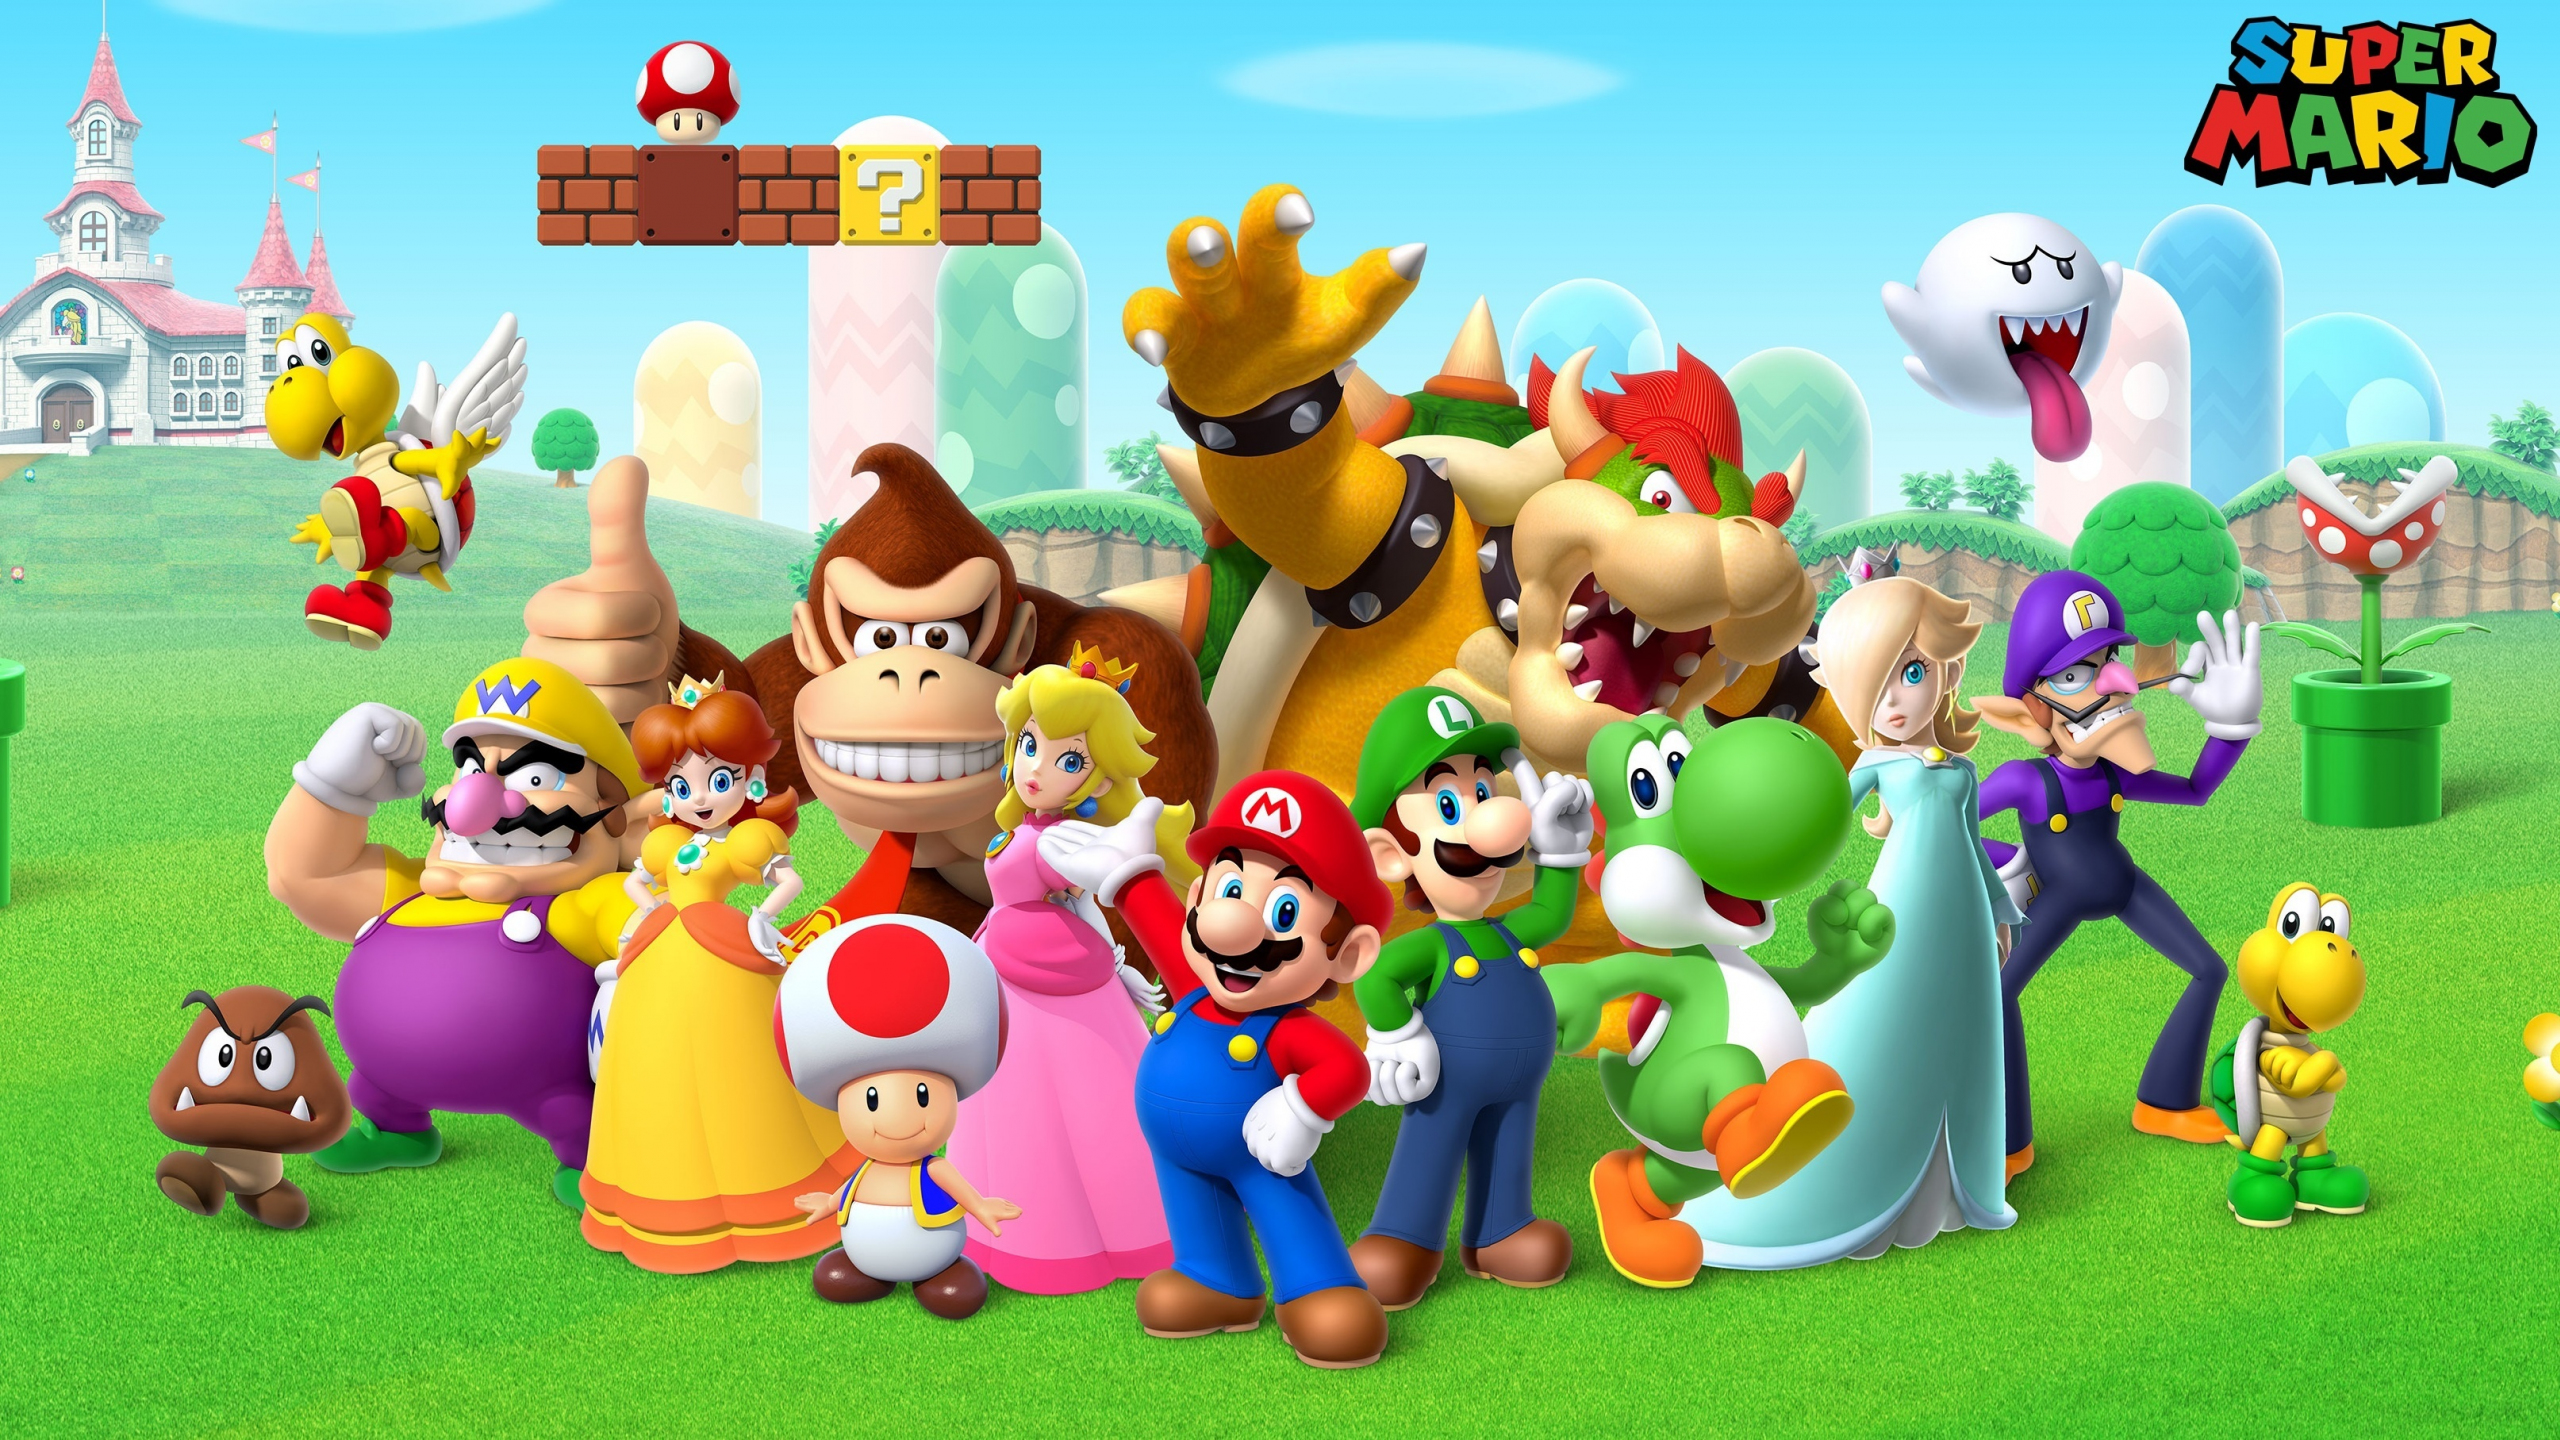 Super mario brothers game download for pc trondas